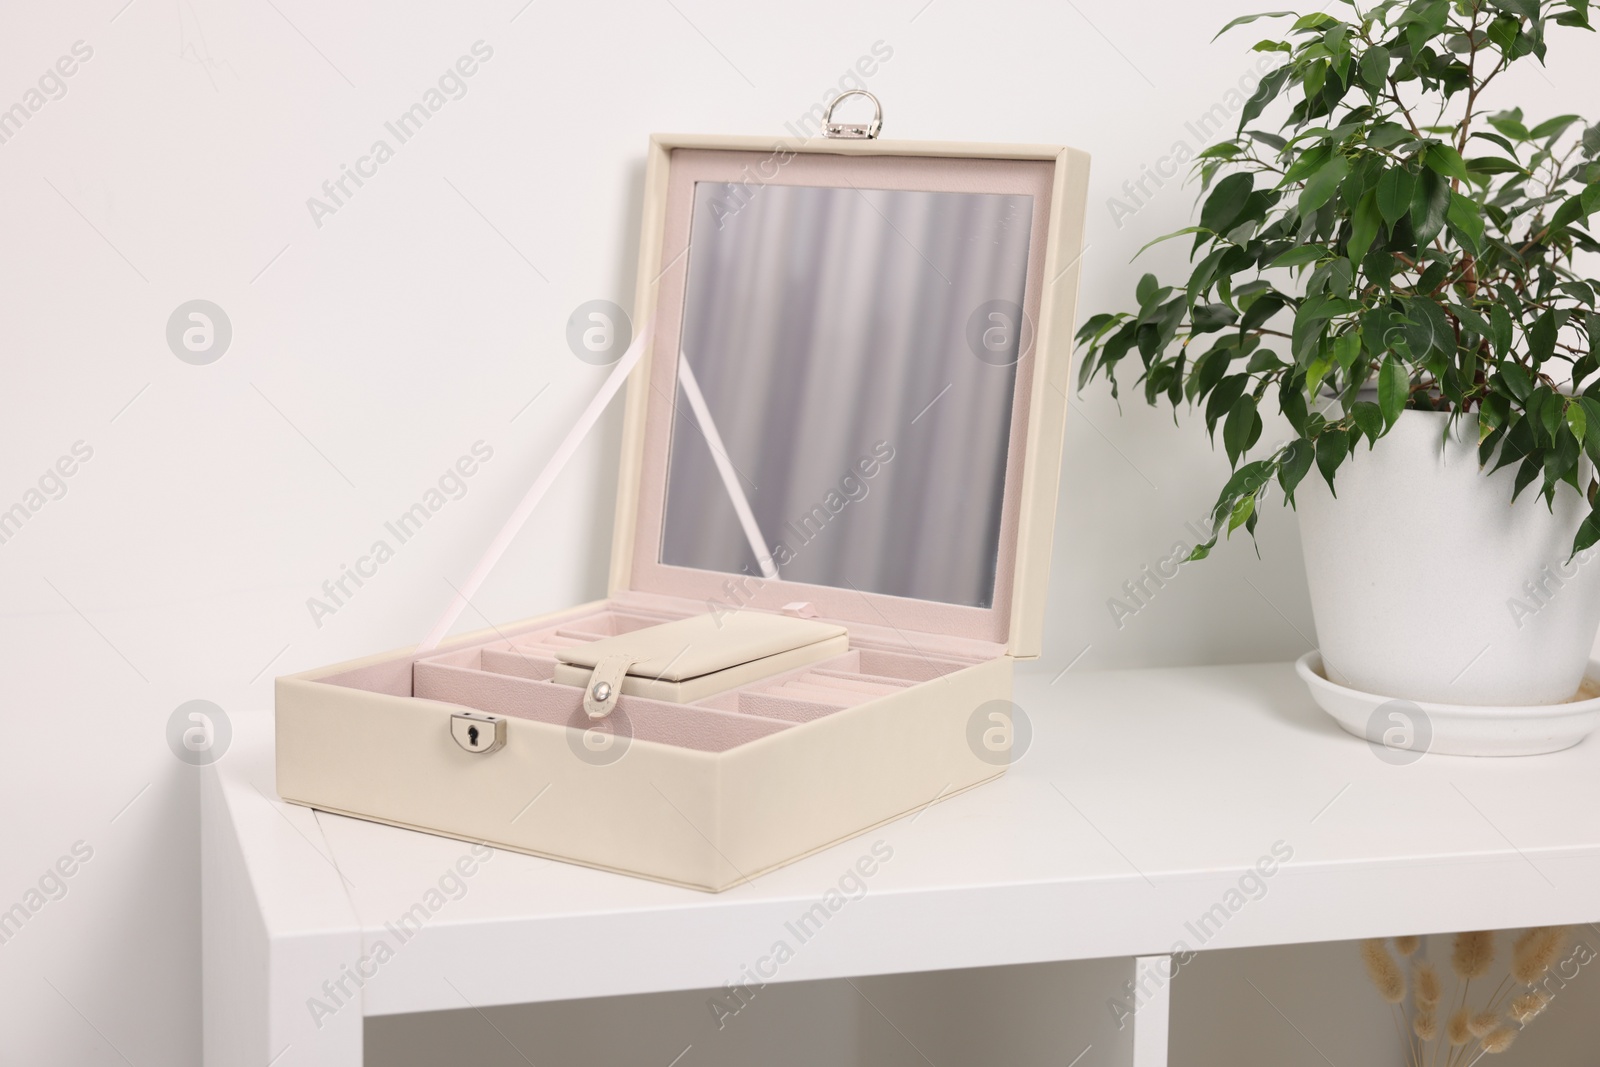 Photo of Empty jewelry box with mirror and houseplant on white table